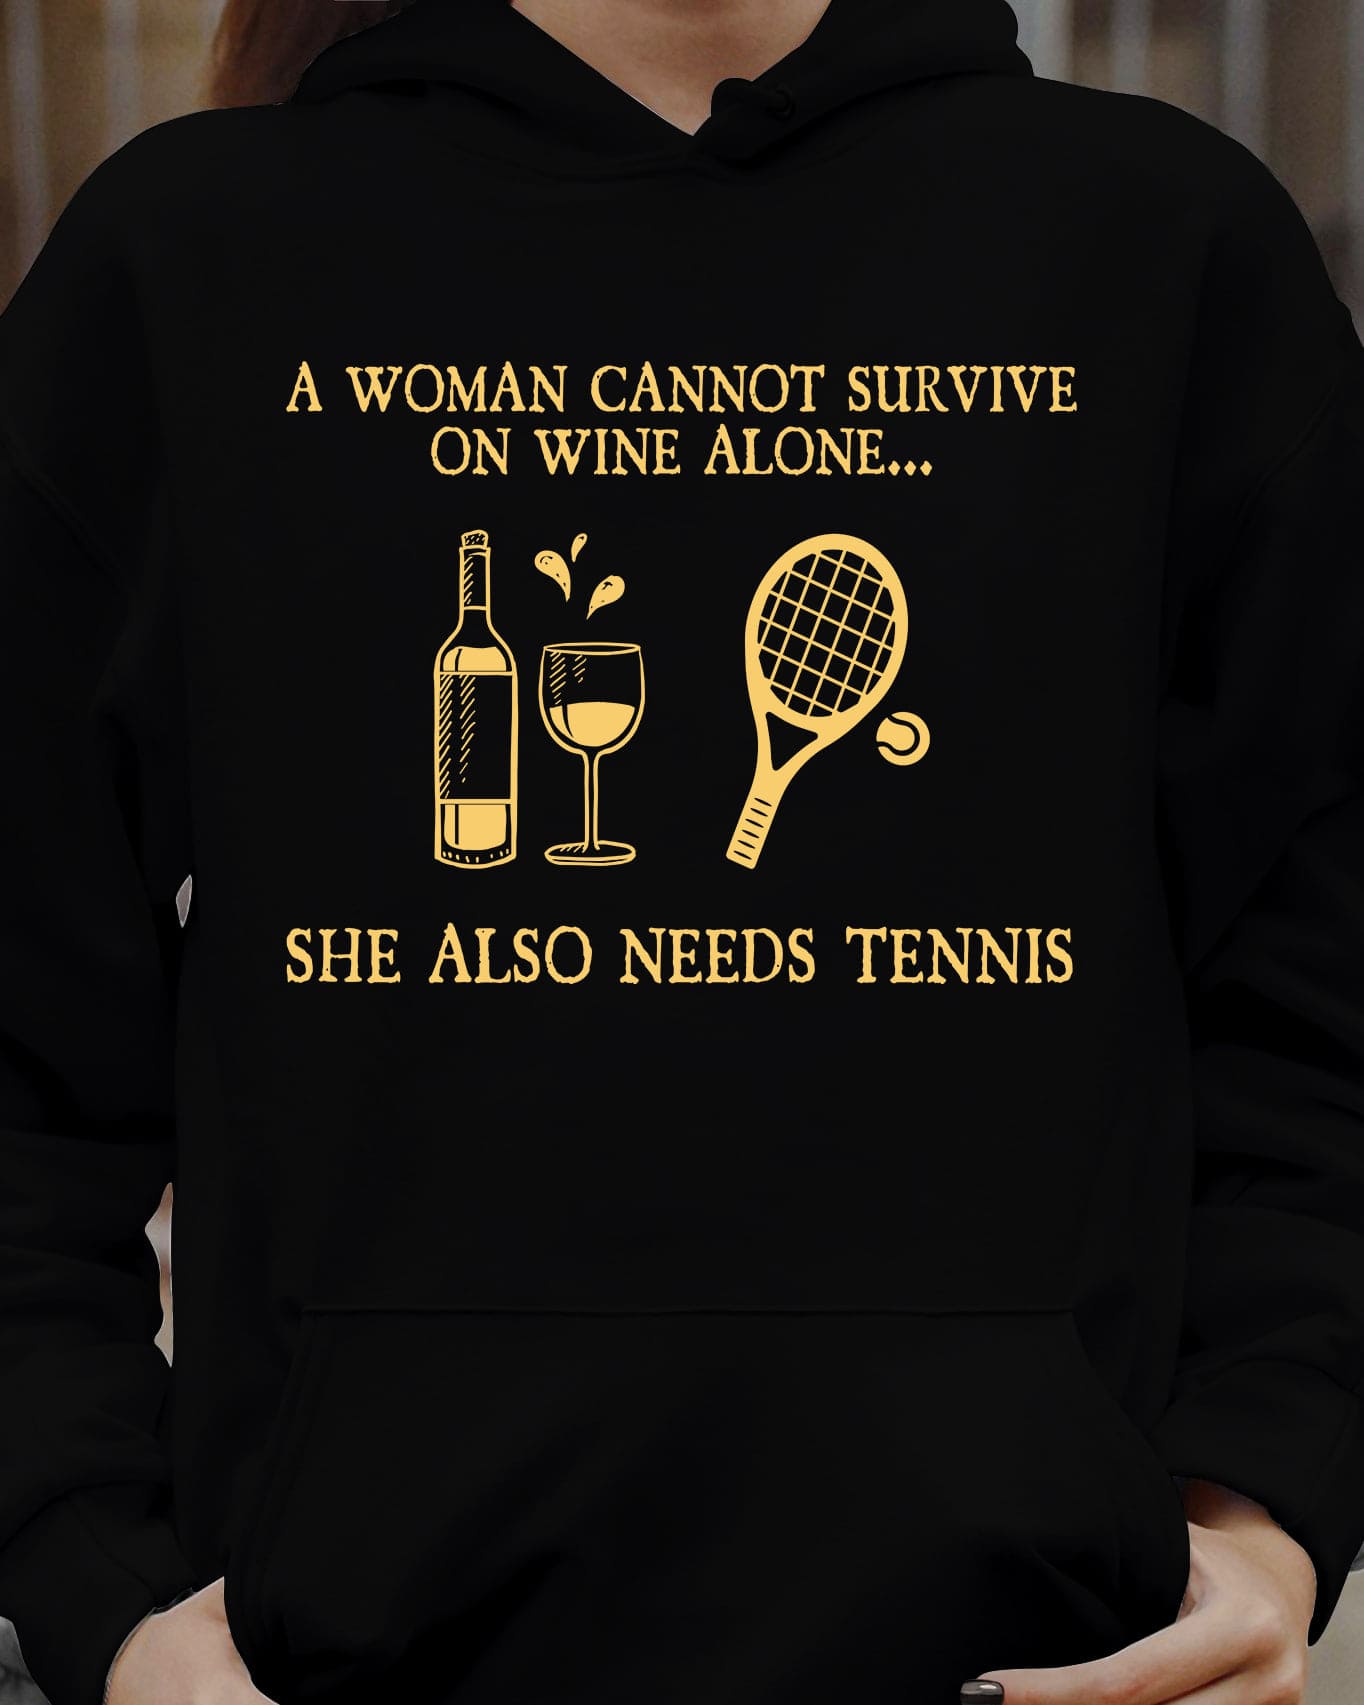 A woman cannot survive on wine alone, she also needs tennis - Gift for tennis player, wine and tennis